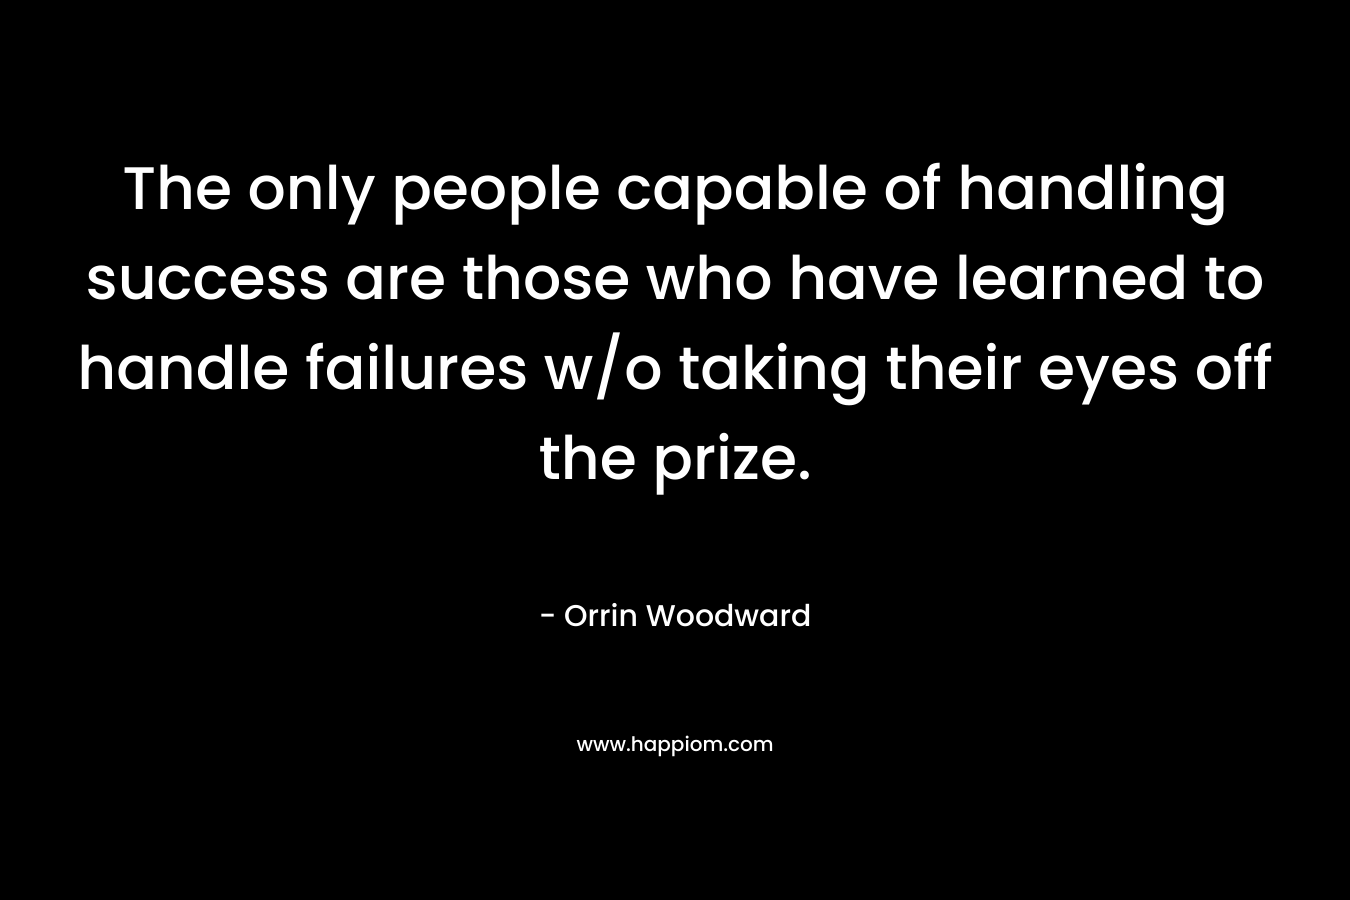 The only people capable of handling success are those who have learned to handle failures w/o taking their eyes off the prize. – Orrin Woodward